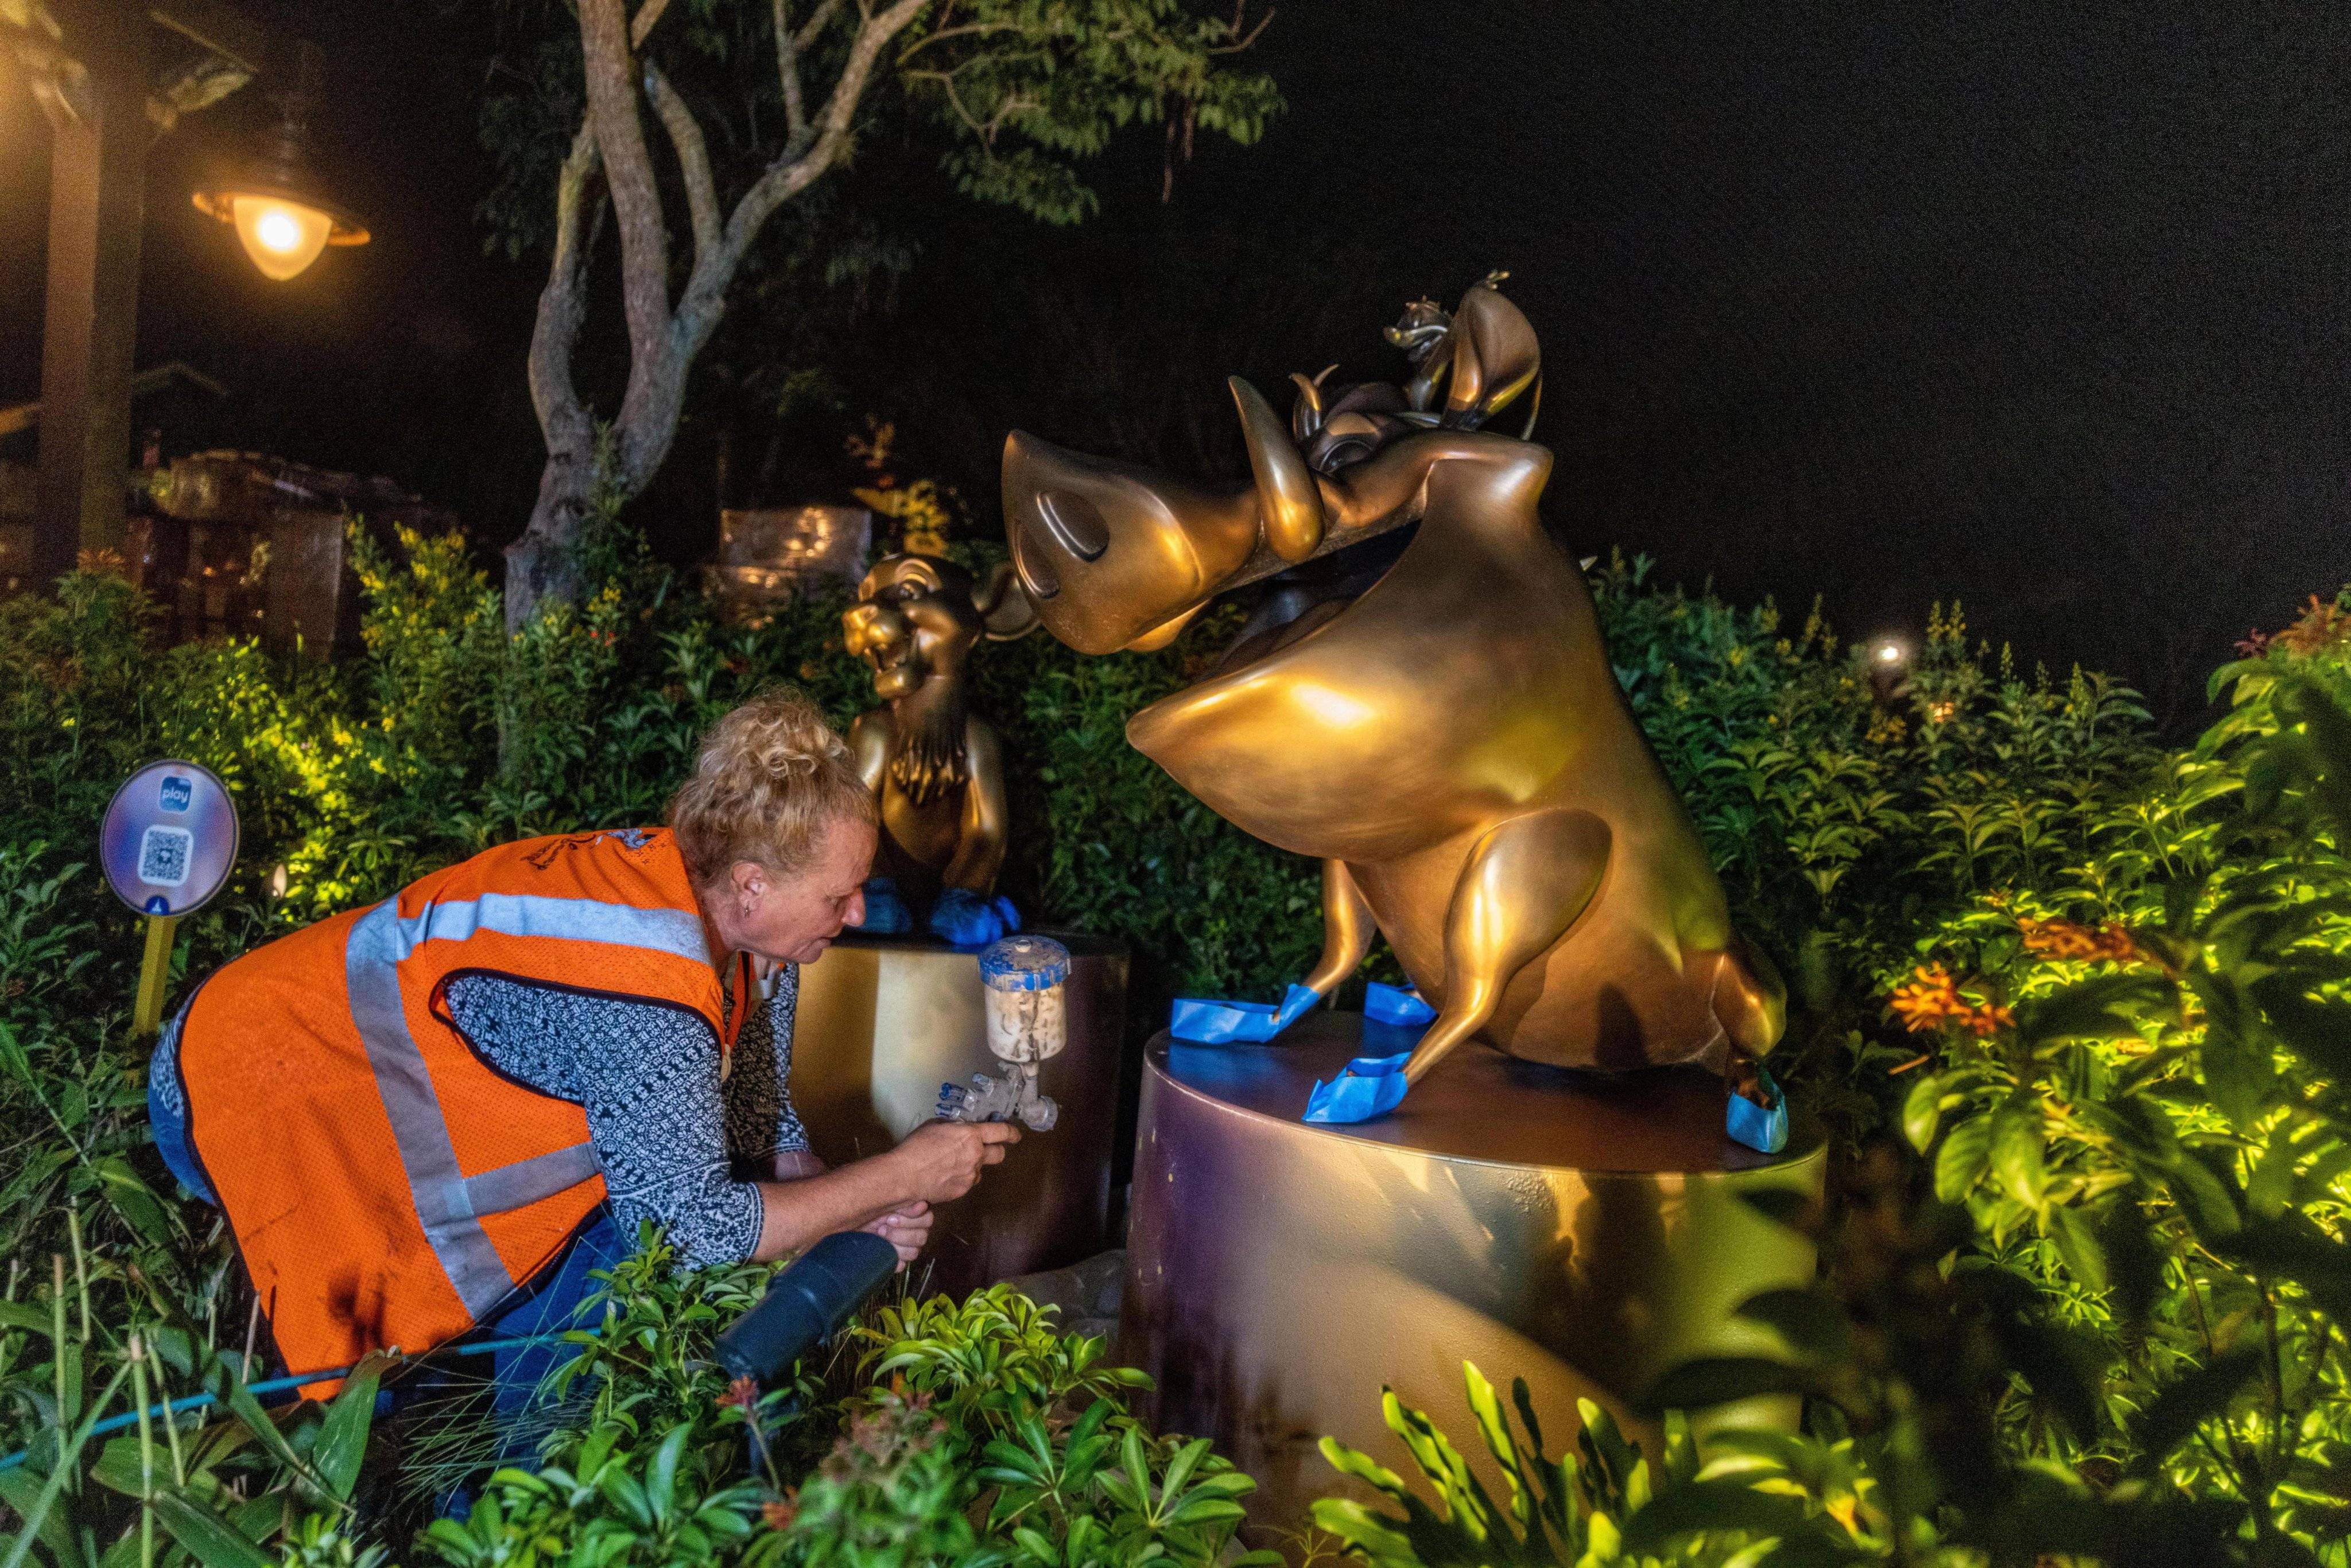 Walt Disney World's Fab 50 character statues to be refinished with a sprinkling of pixie dust